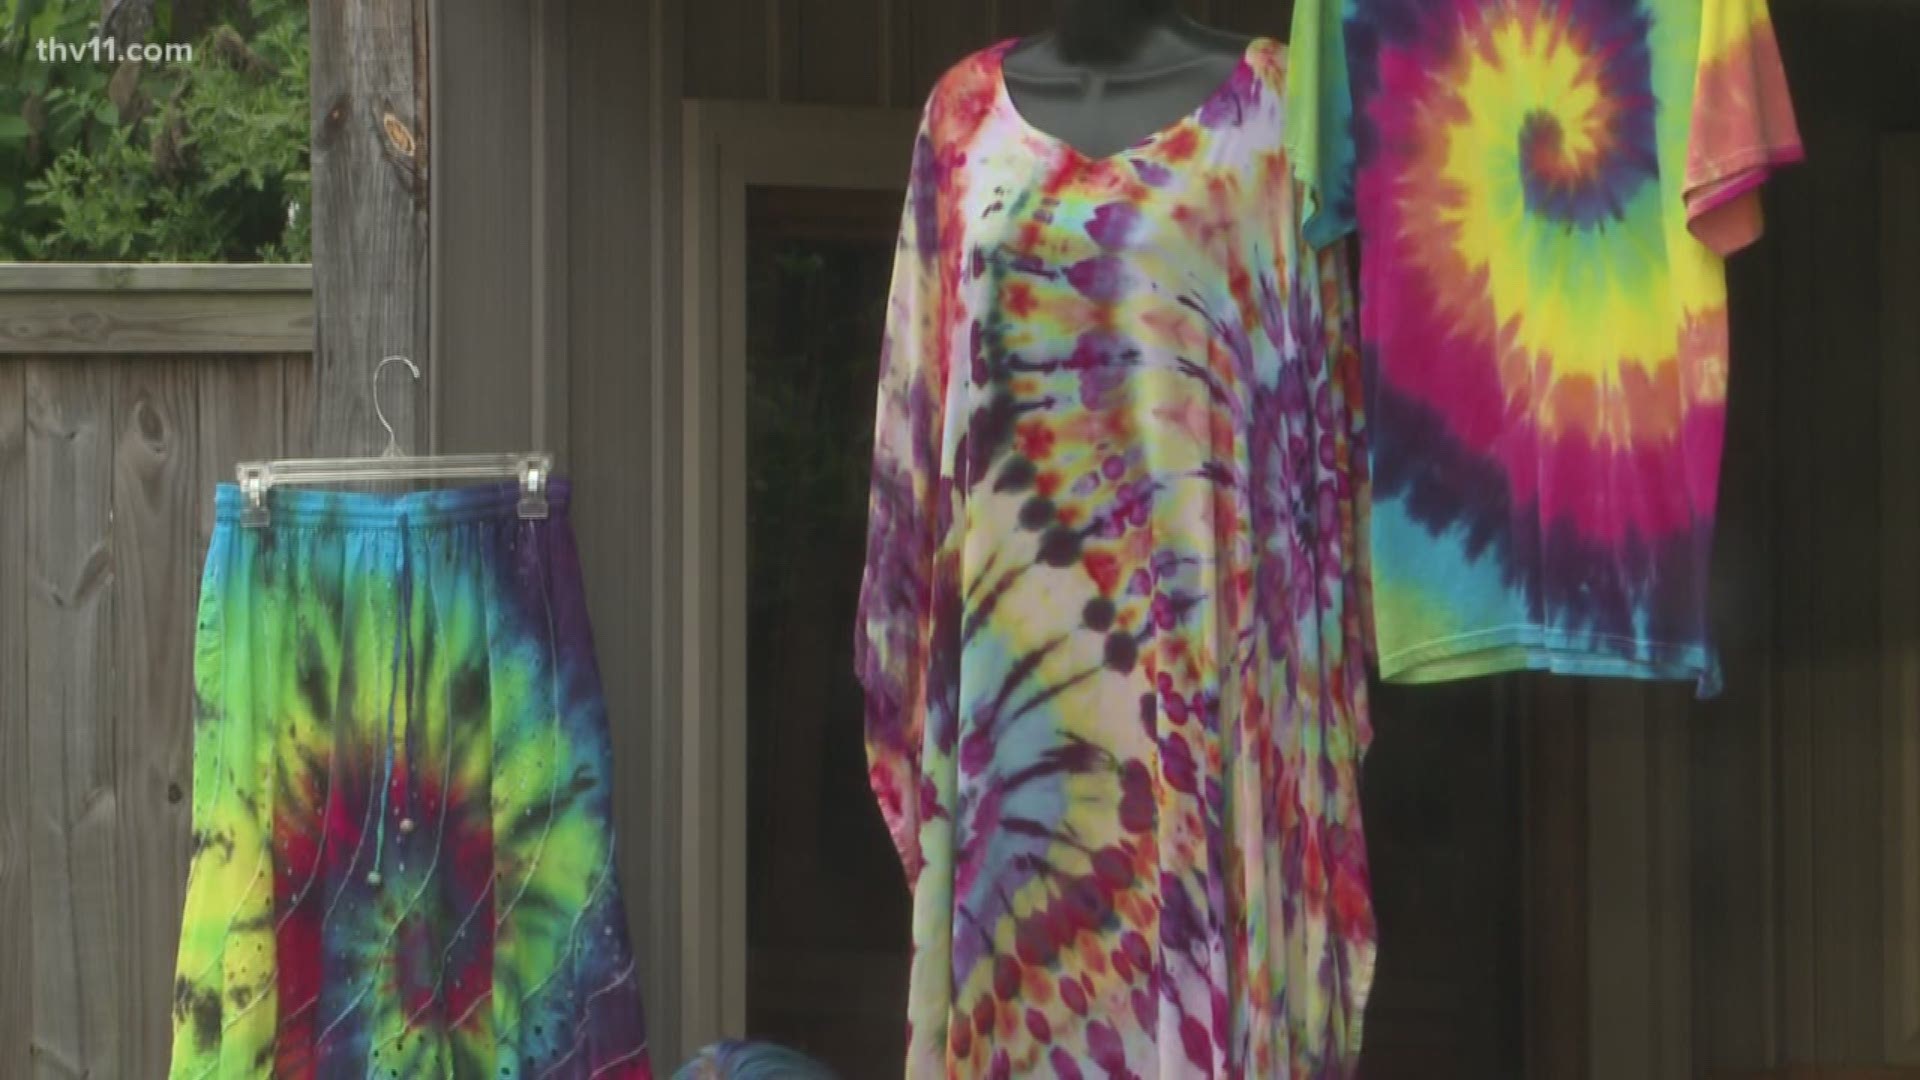 Next Generation Tye-Dyes stopped by The Vine for a two-part series on how to make your very own super cool tye-dye clothes for the summer.